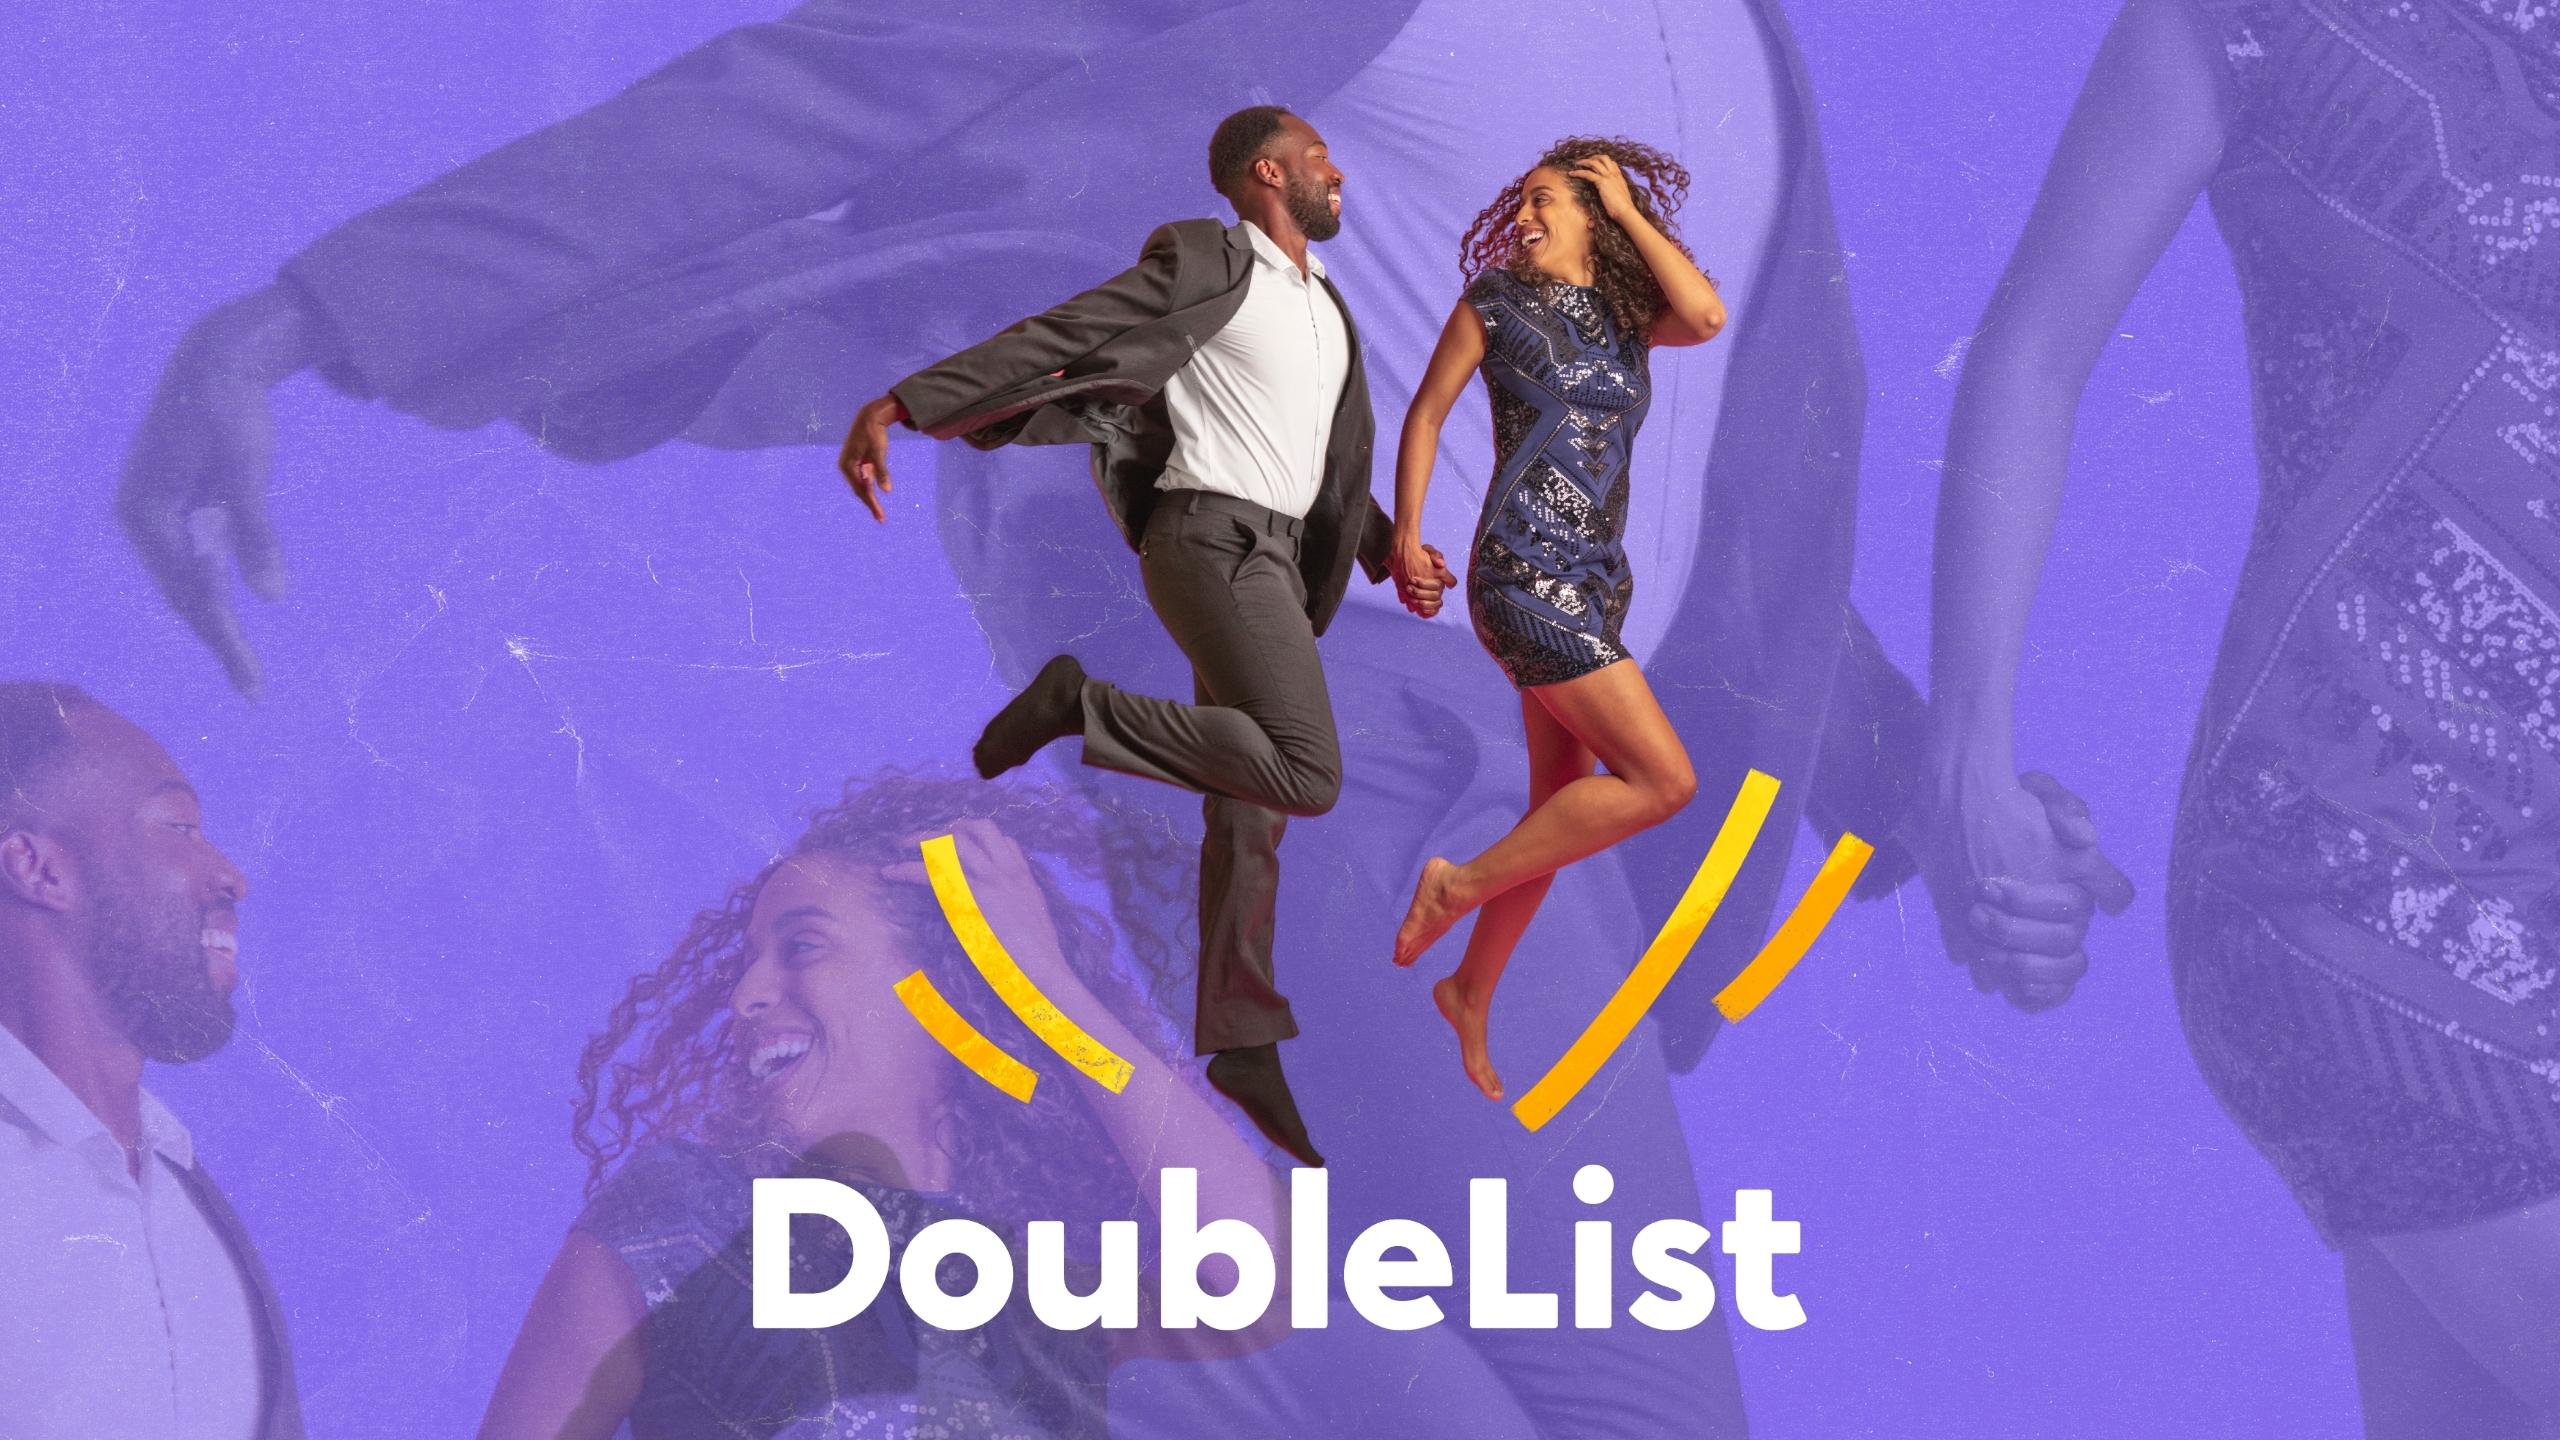 DoubleList graphic of a happily smiling and dancing couple holding hands against a purple textured backdrop.